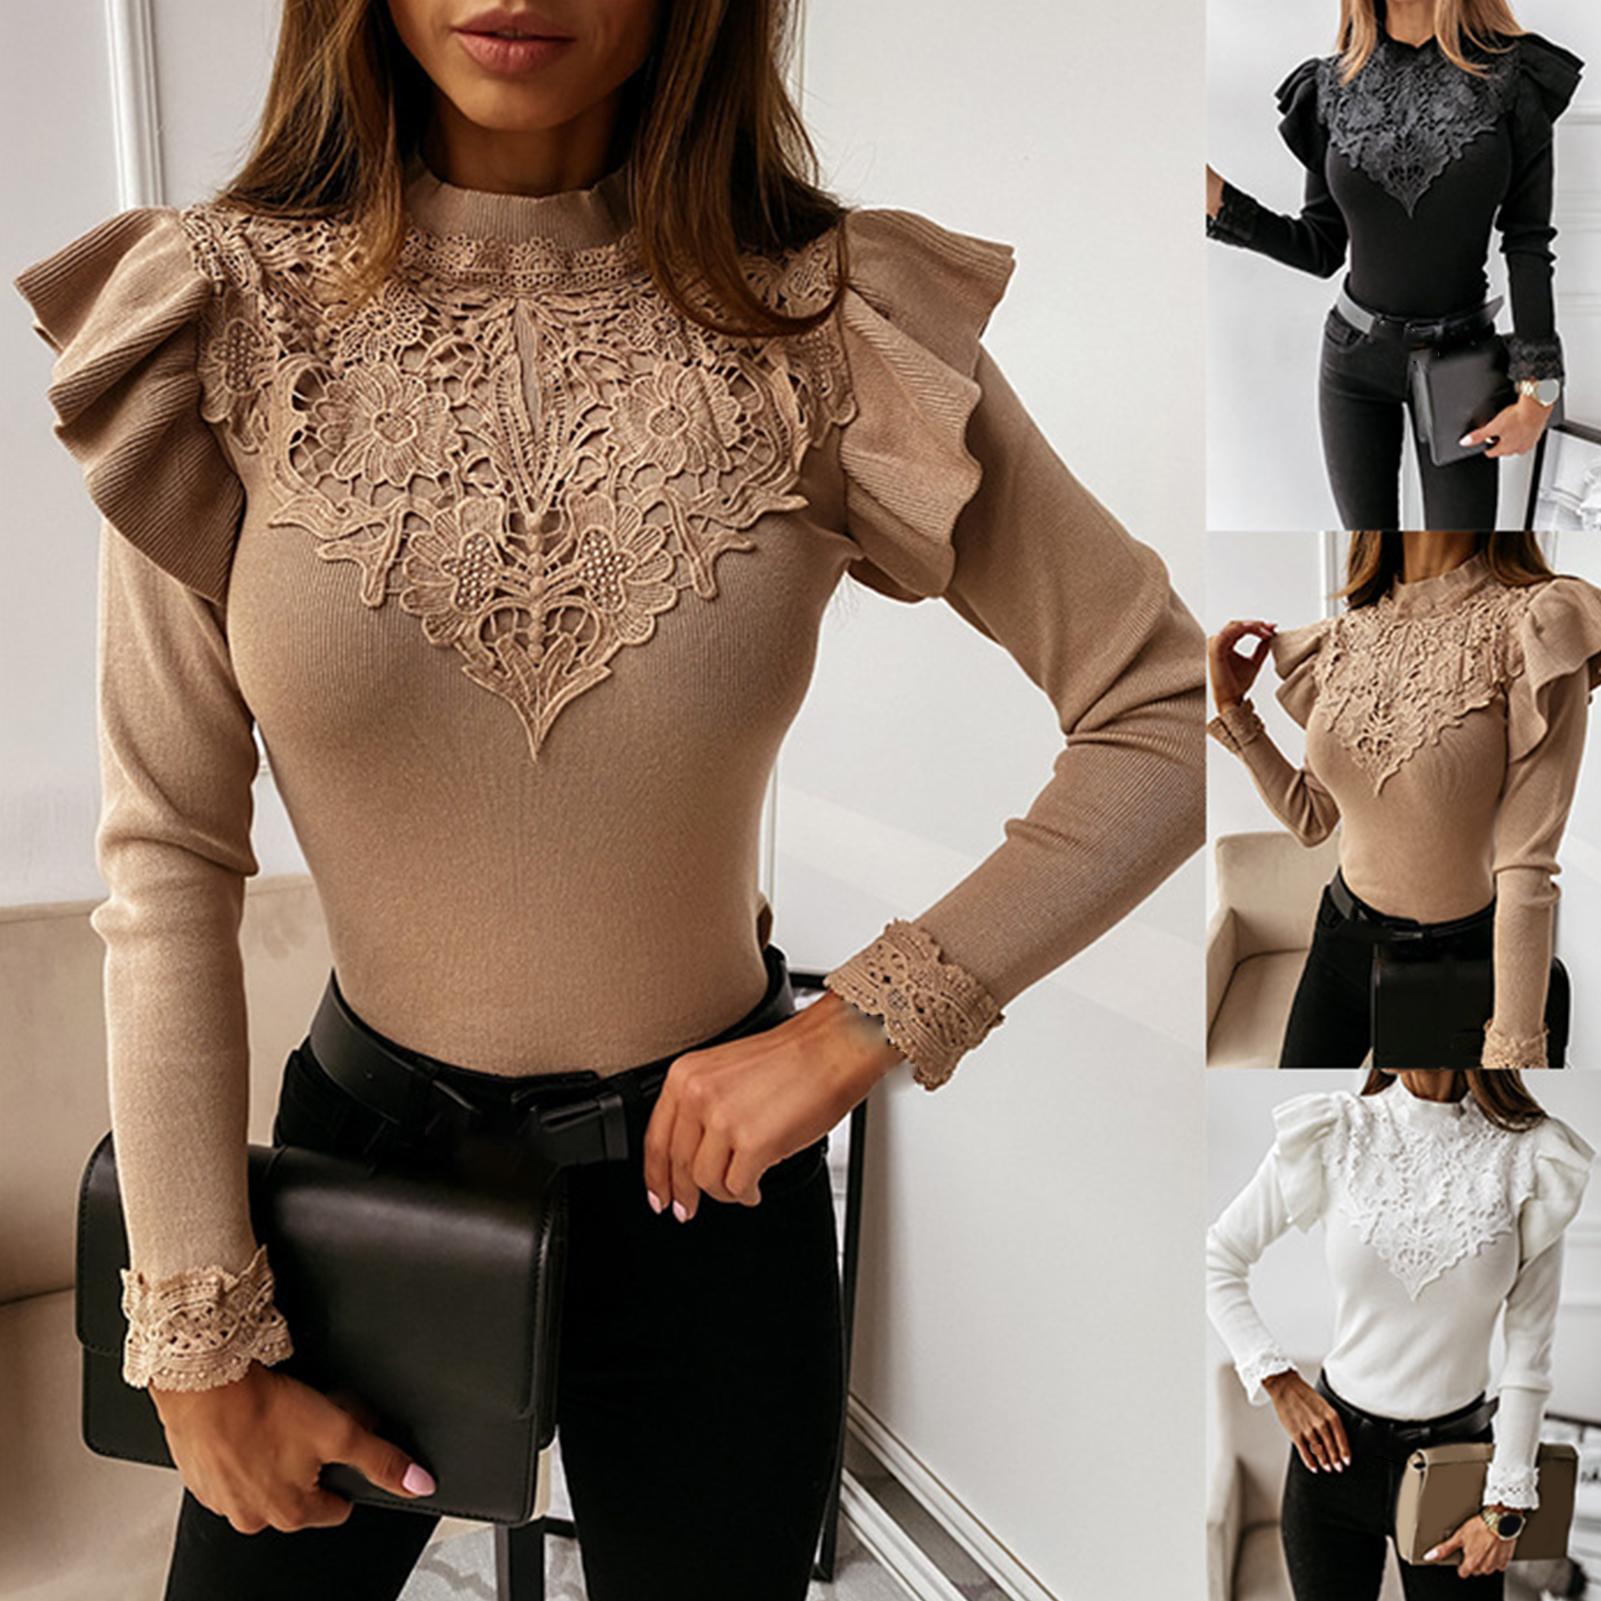 New Autumn Long Sleeve Ruffle Lace Patchwork Blouse For Women